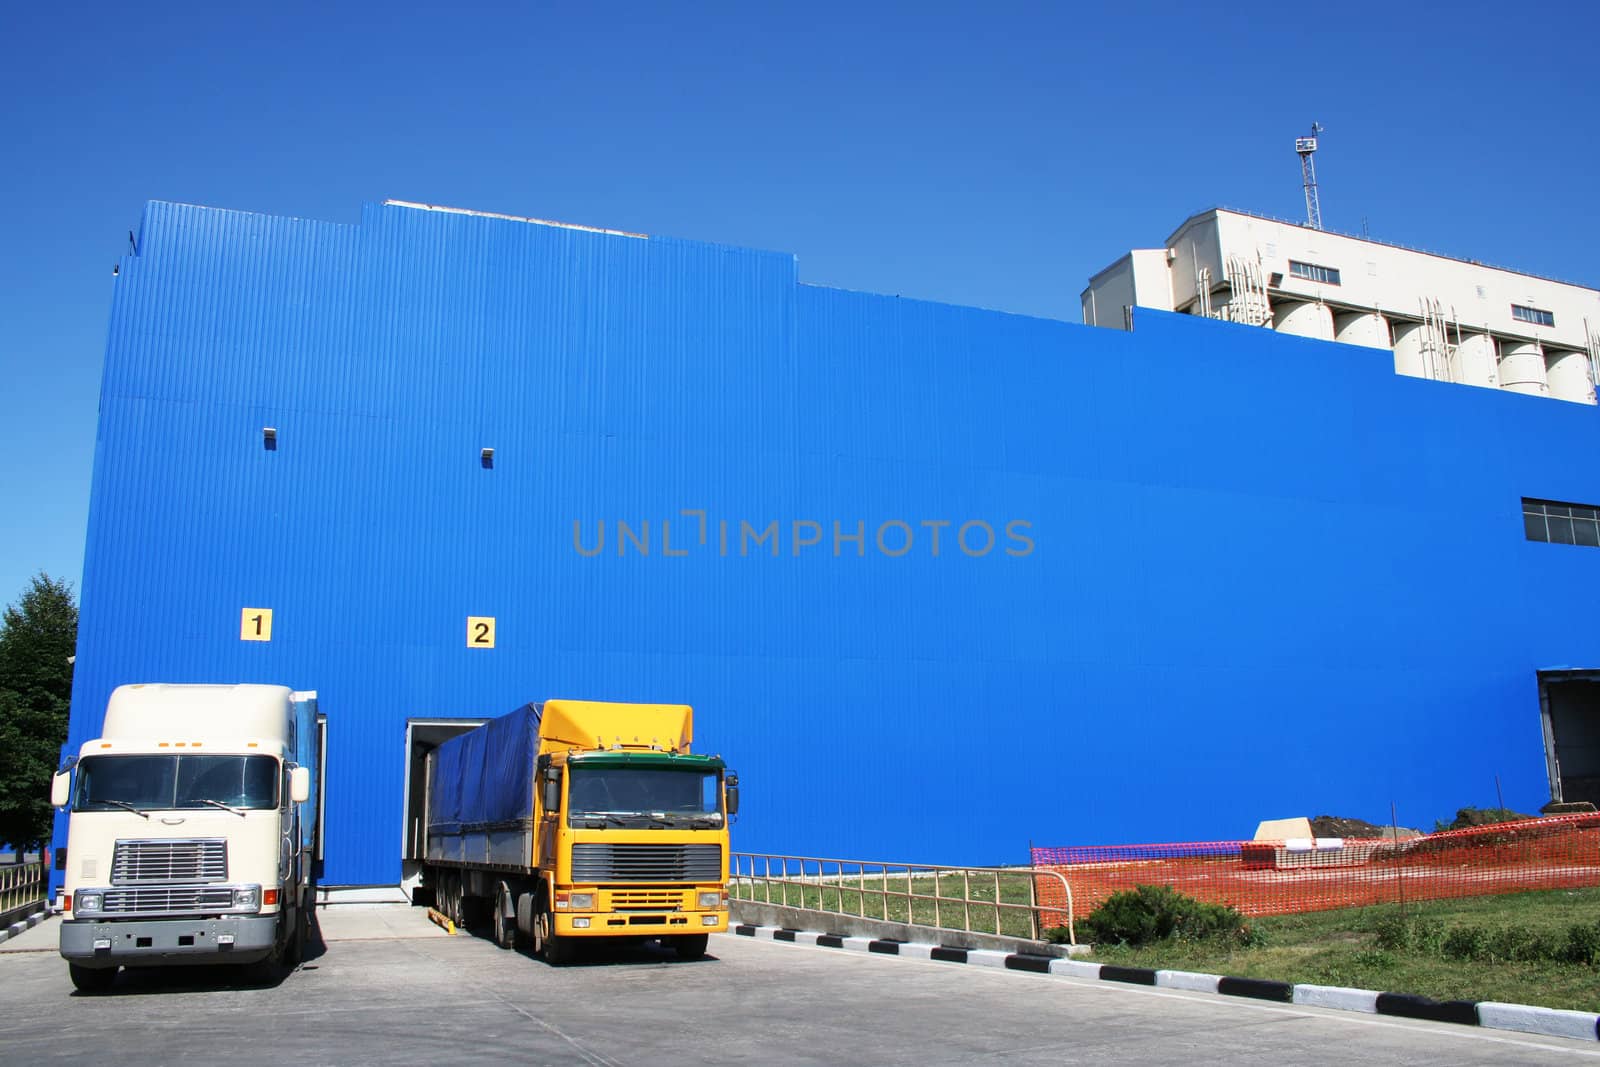 Two lorries on a background of a dark blue warehouse